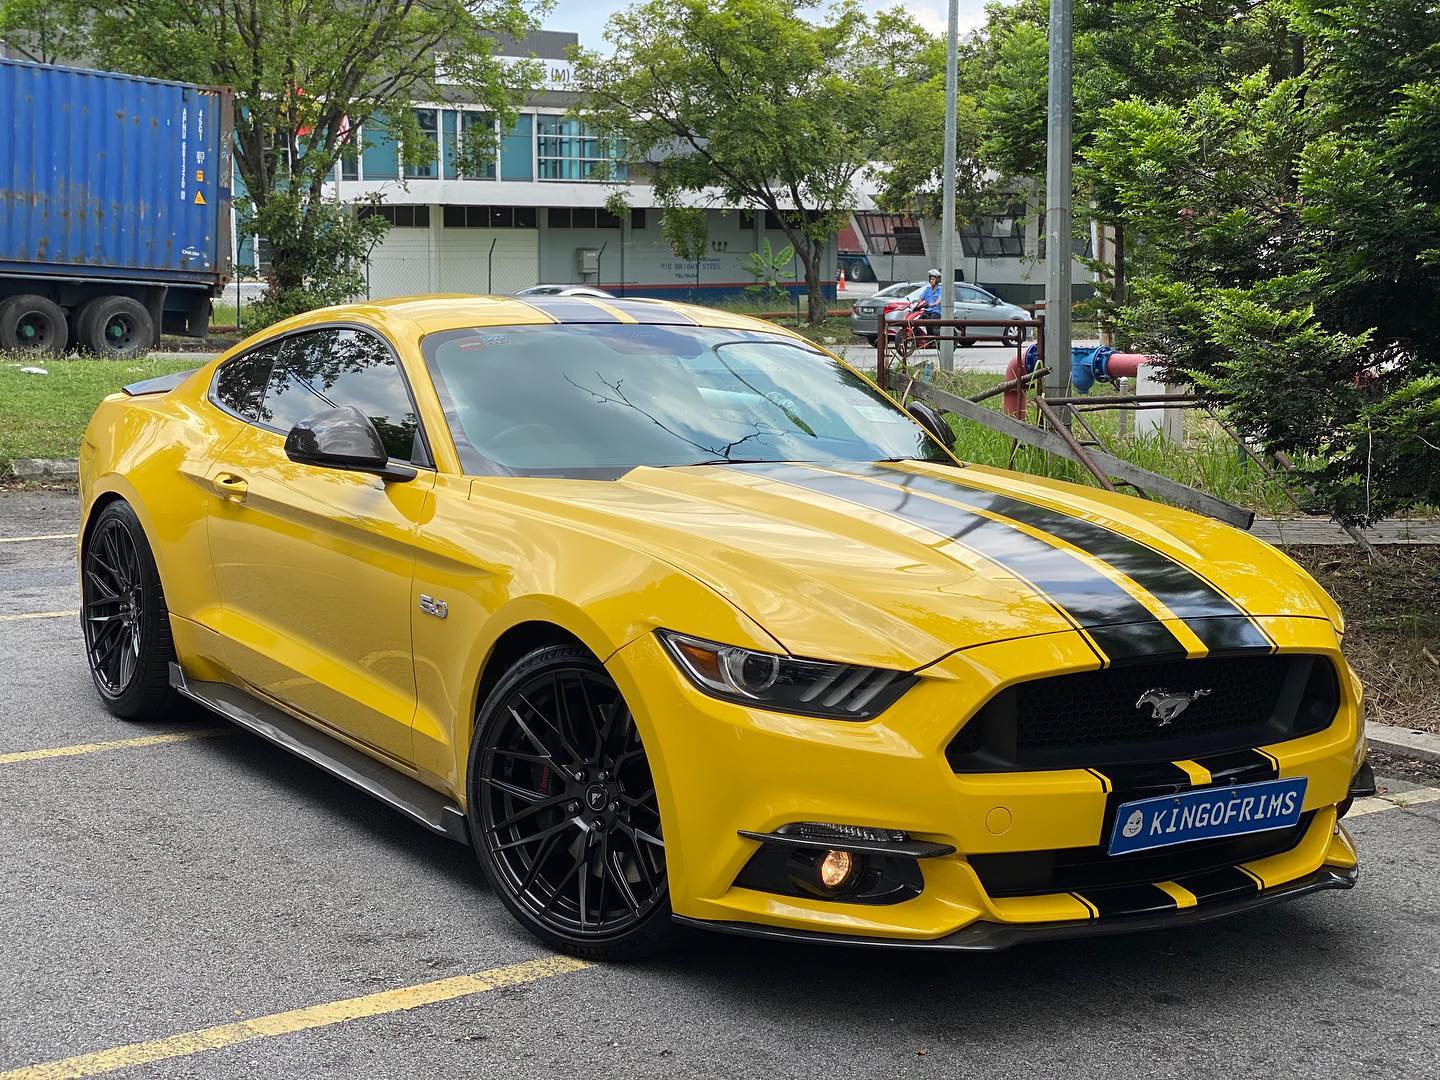 Ford Mustang Gt S550 Yellow Vorsteiner V Ff 107 Wheel Front